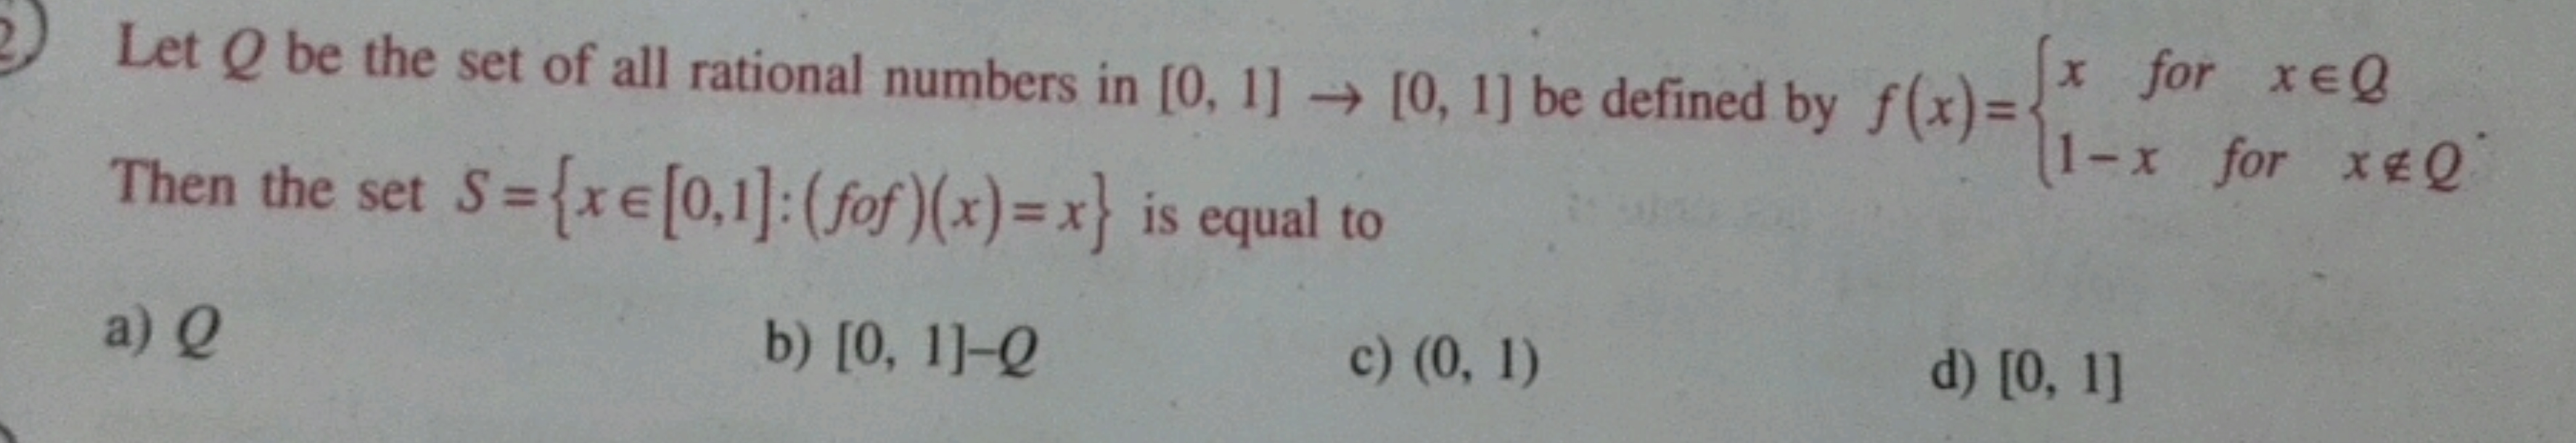 Then the set S={x∈[0,1]:(f∘f)(x)=x} is equal to